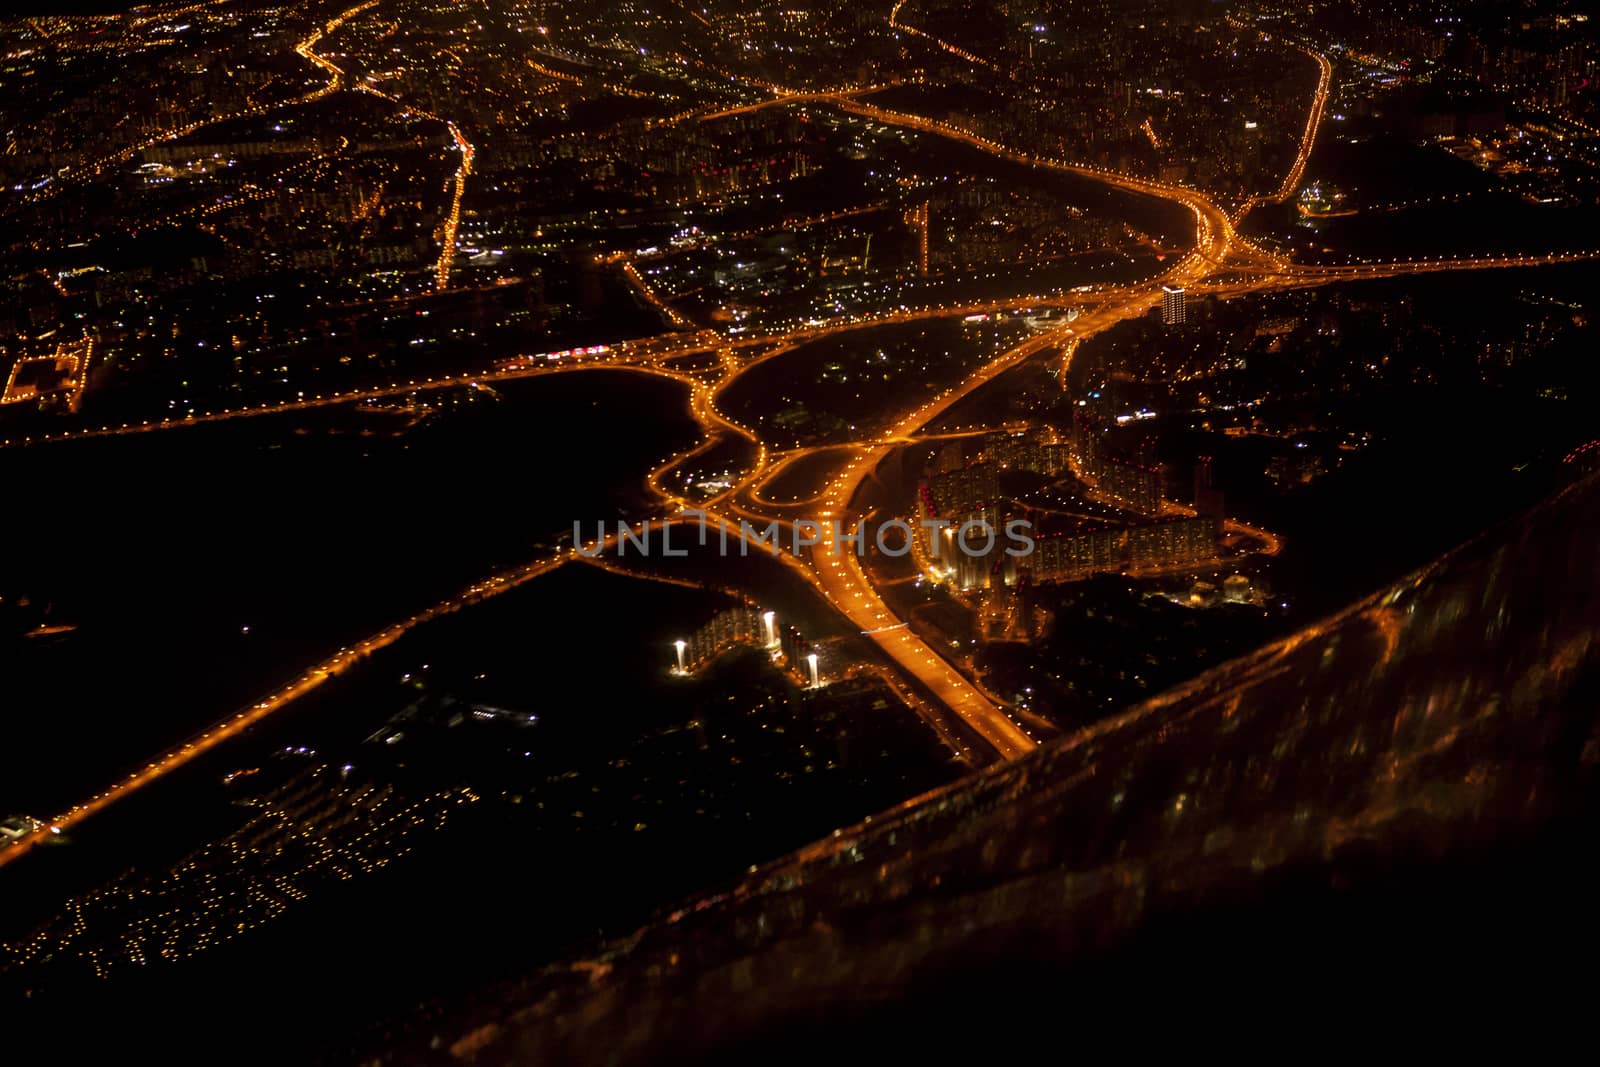 View the city at night from an airplane. by sergey_pankin